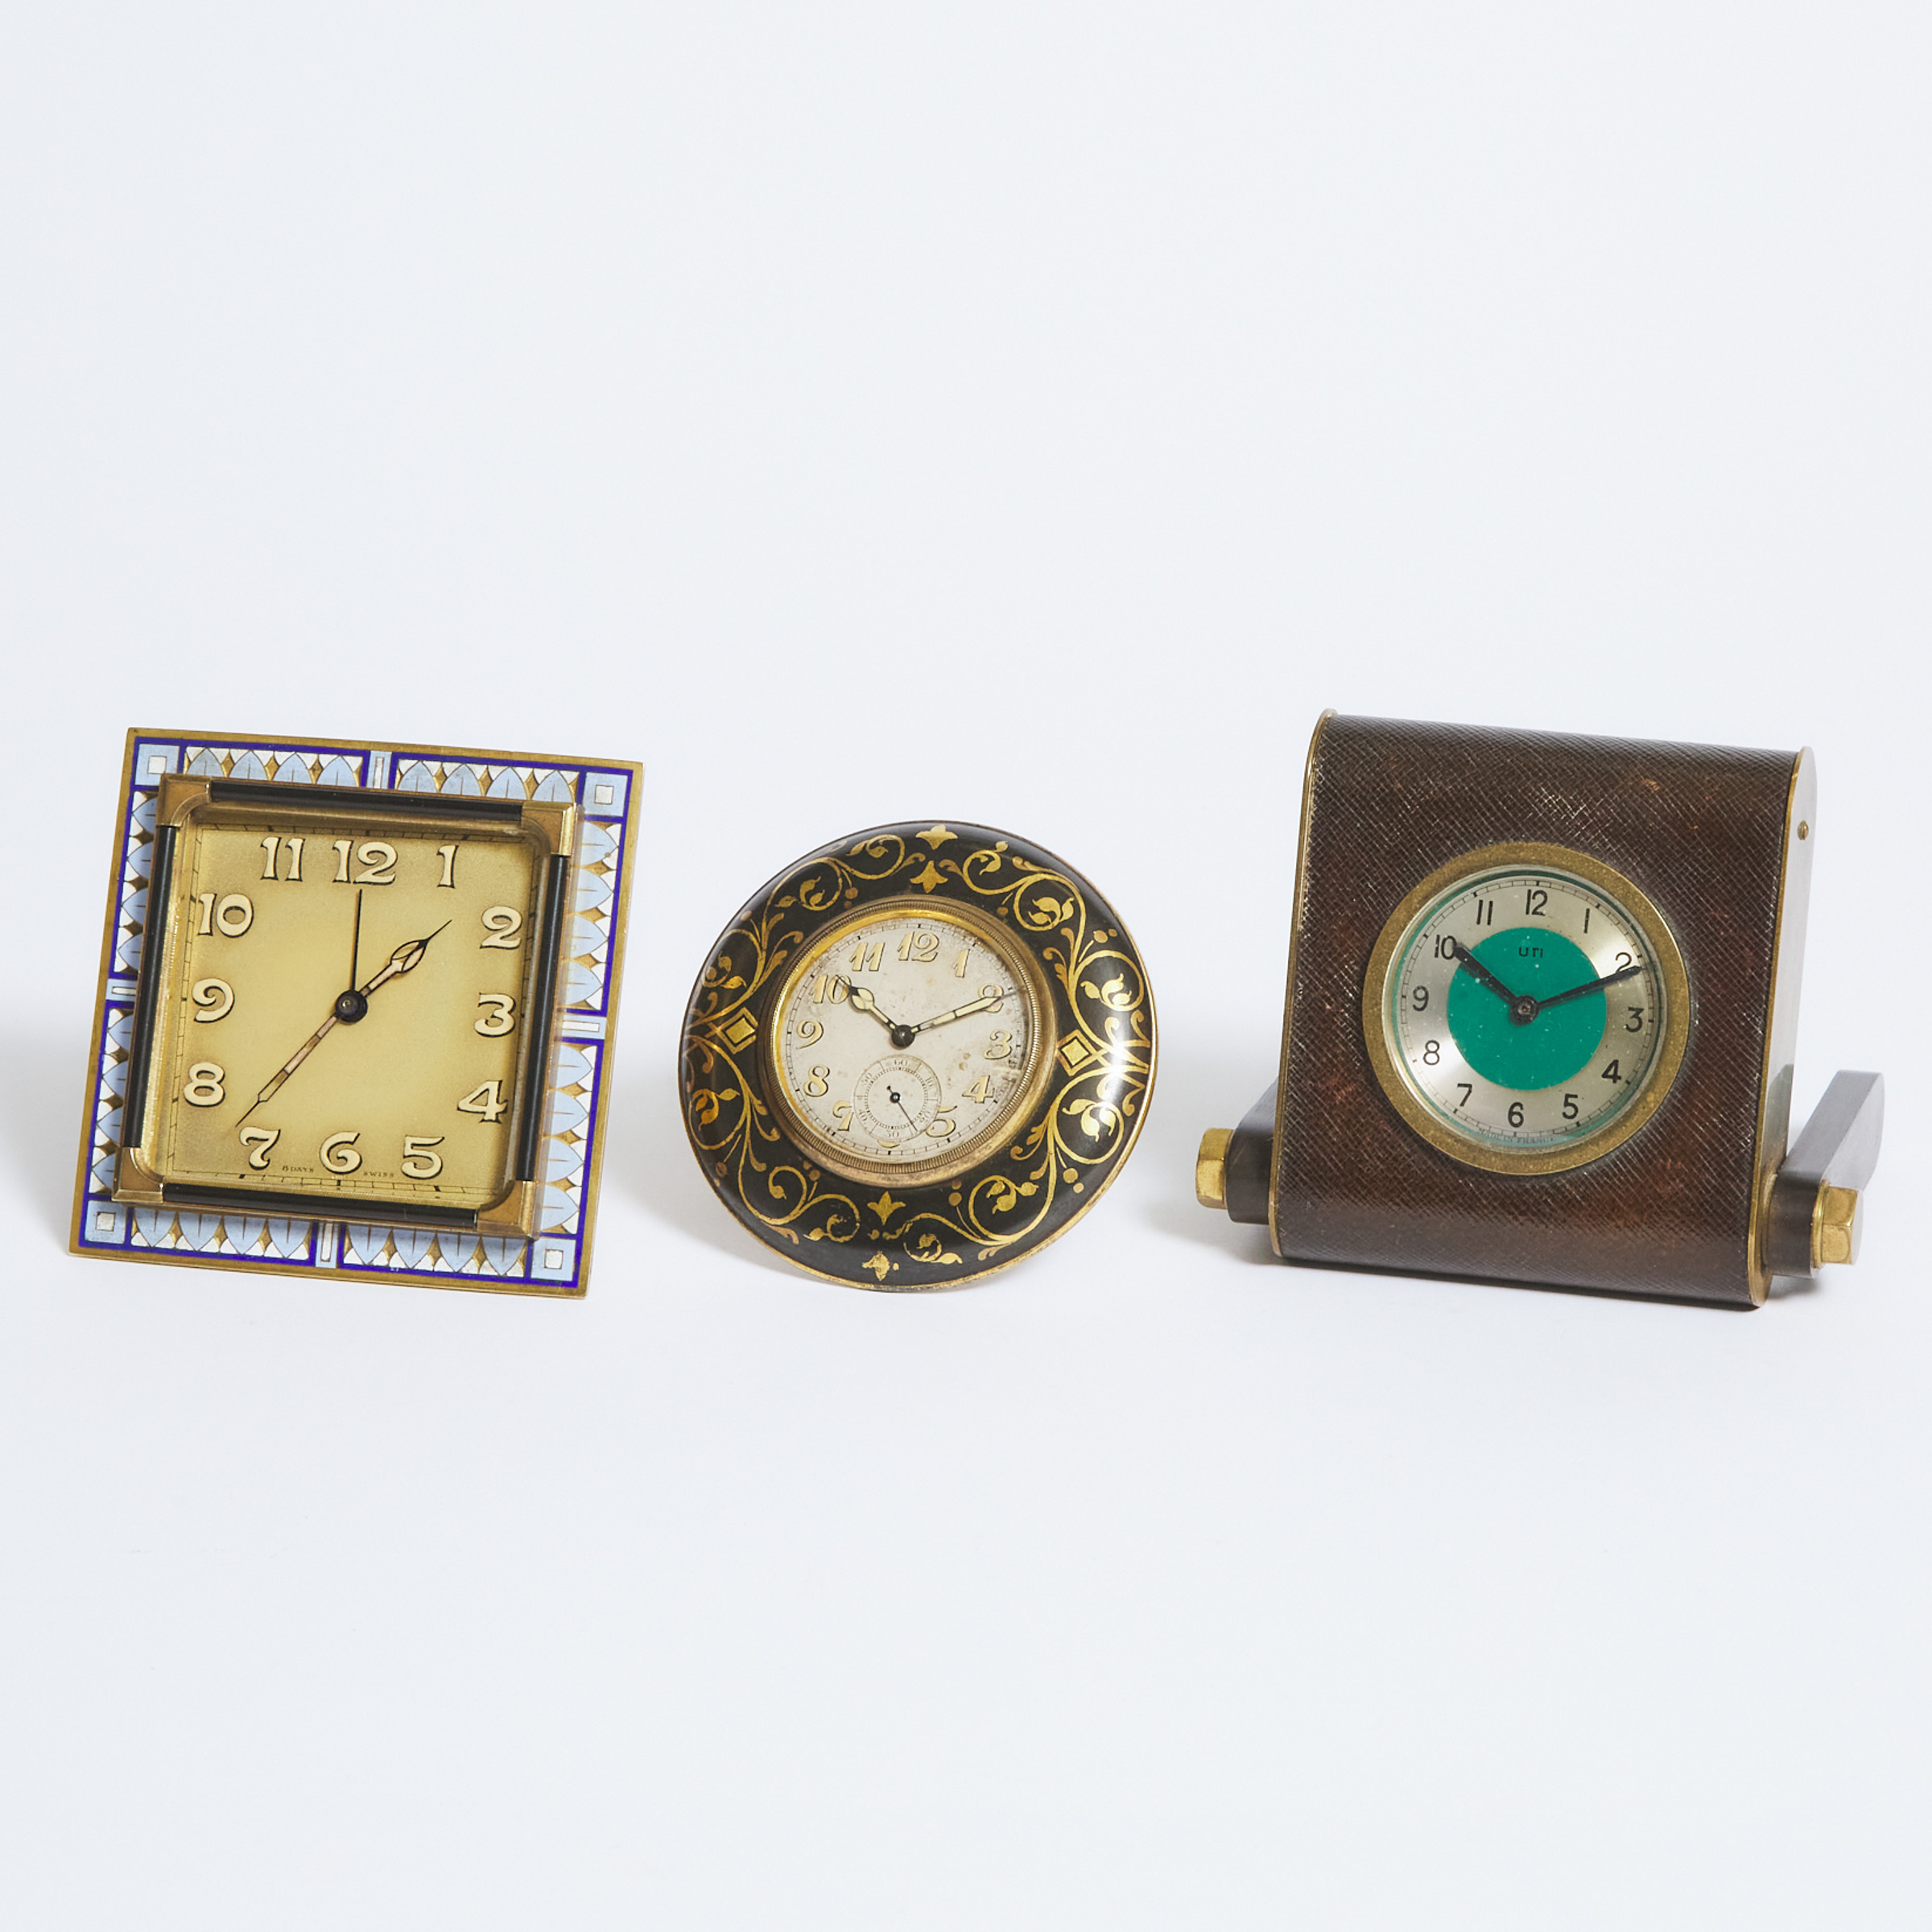 Group of Three Decorative Travelling Clocks, early 20th century